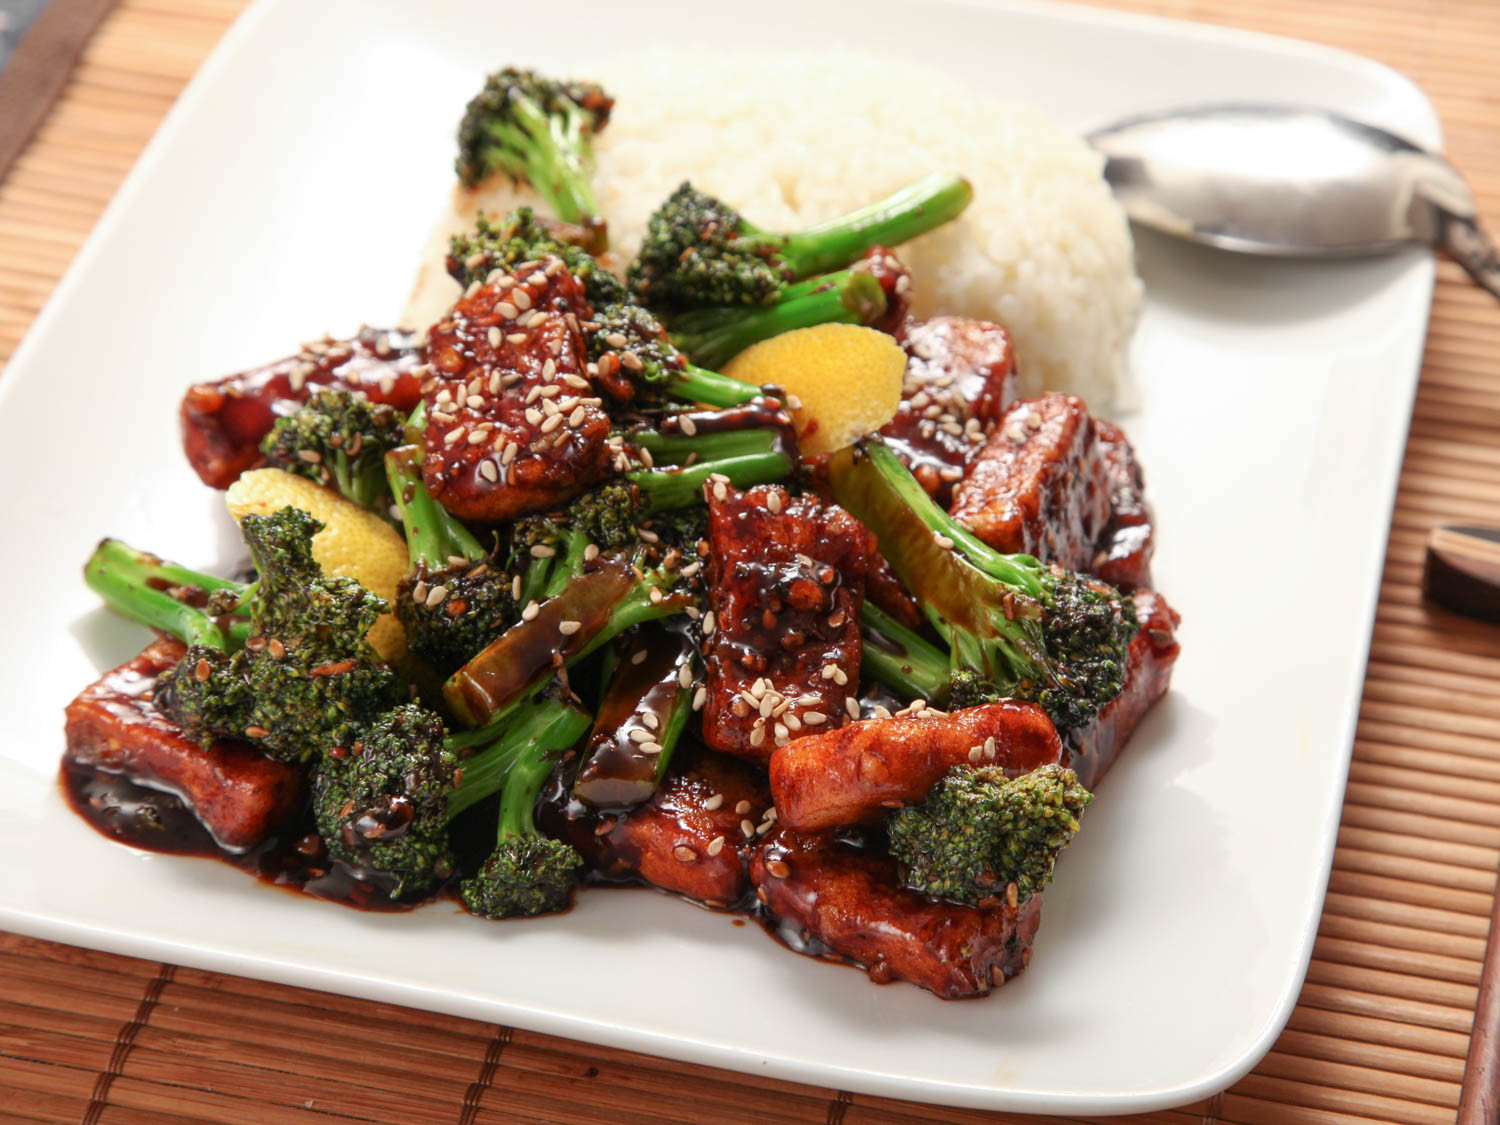 Recipes Using Tofu
 Cook Tofu Better With These 14 Recipes